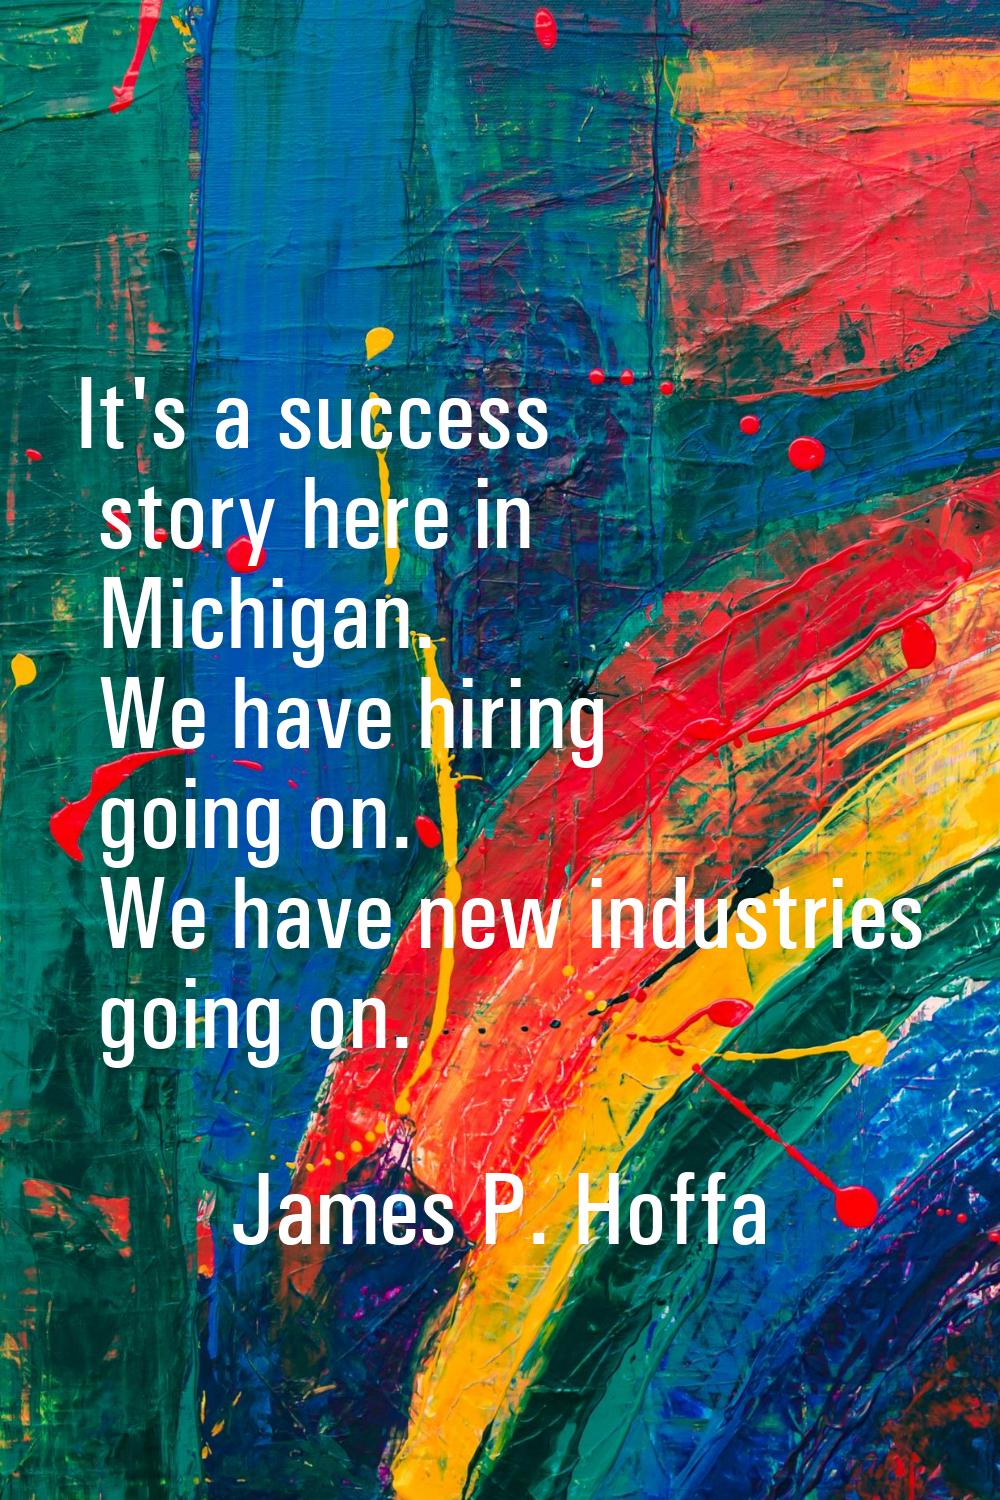 It's a success story here in Michigan. We have hiring going on. We have new industries going on.